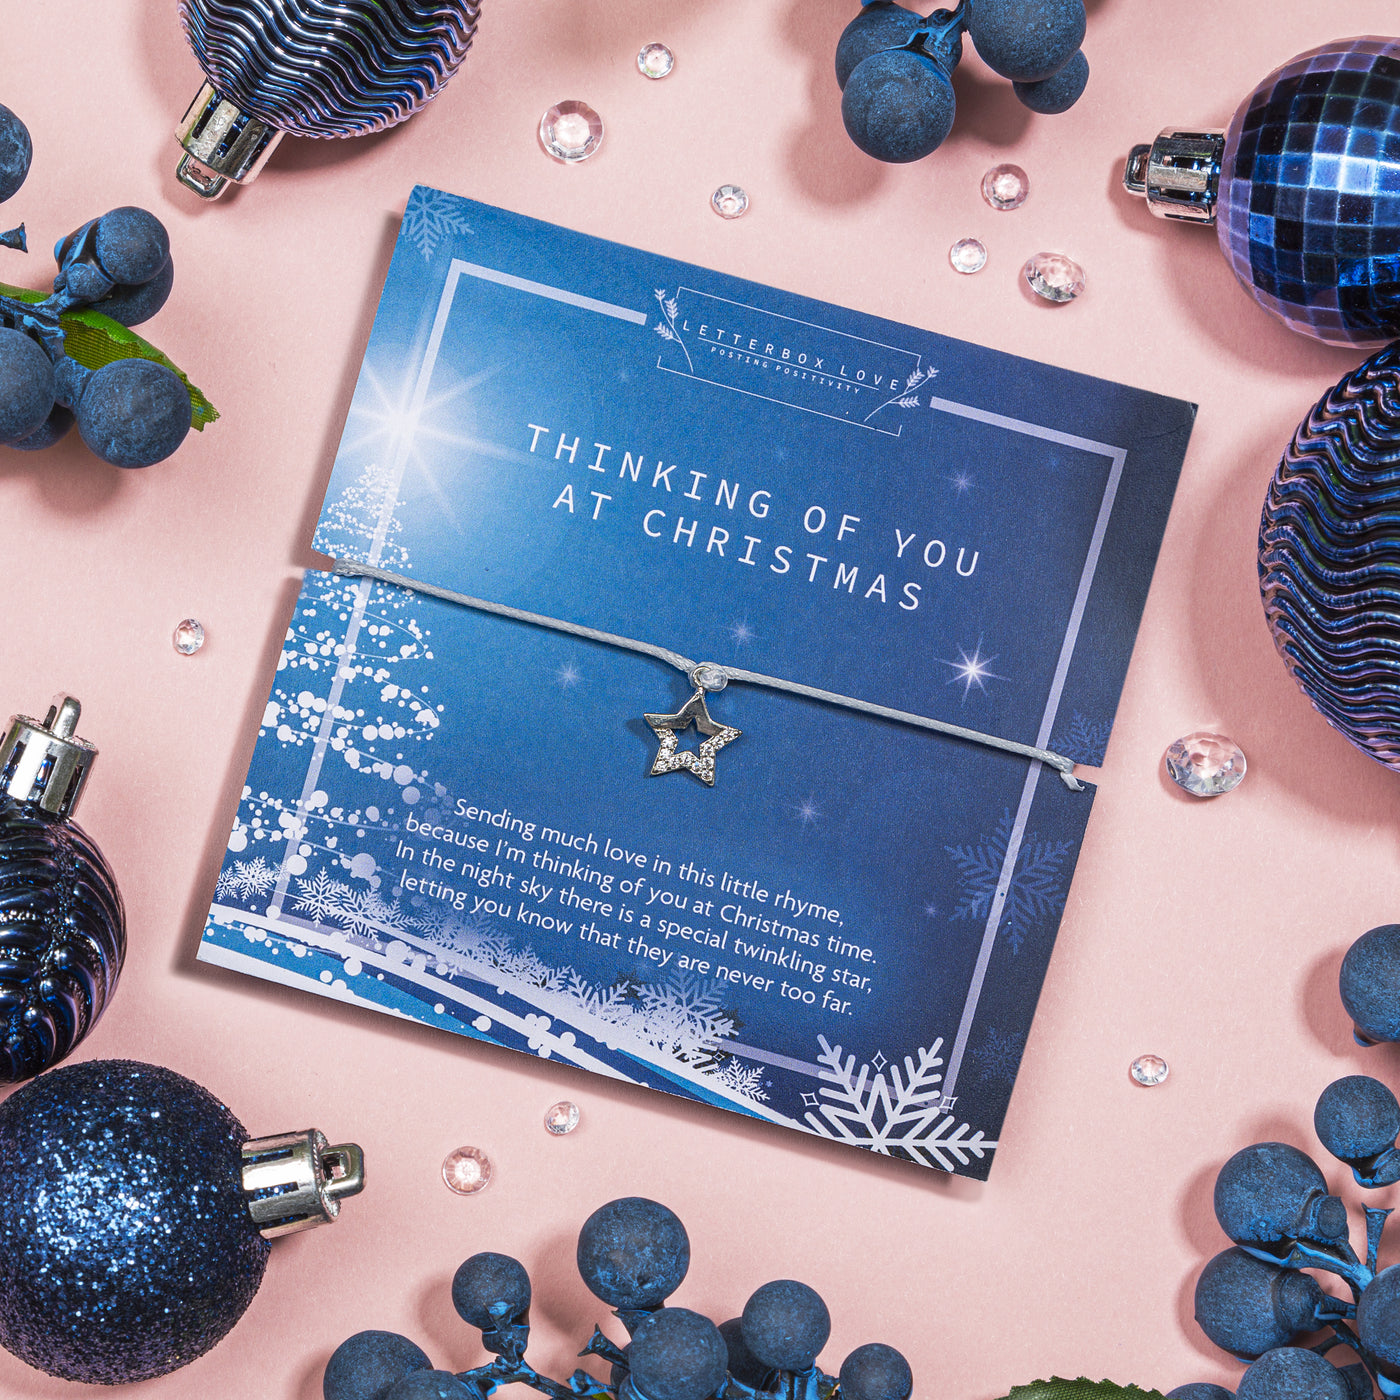 Charming 'Thinking of You at Christmas' card displayed on a pastel pink background. The deep blue card showcases shimmering winter illustrations and a heartfelt message about a special twinkling star. Accompanying the card is a silver star charm bracelet.